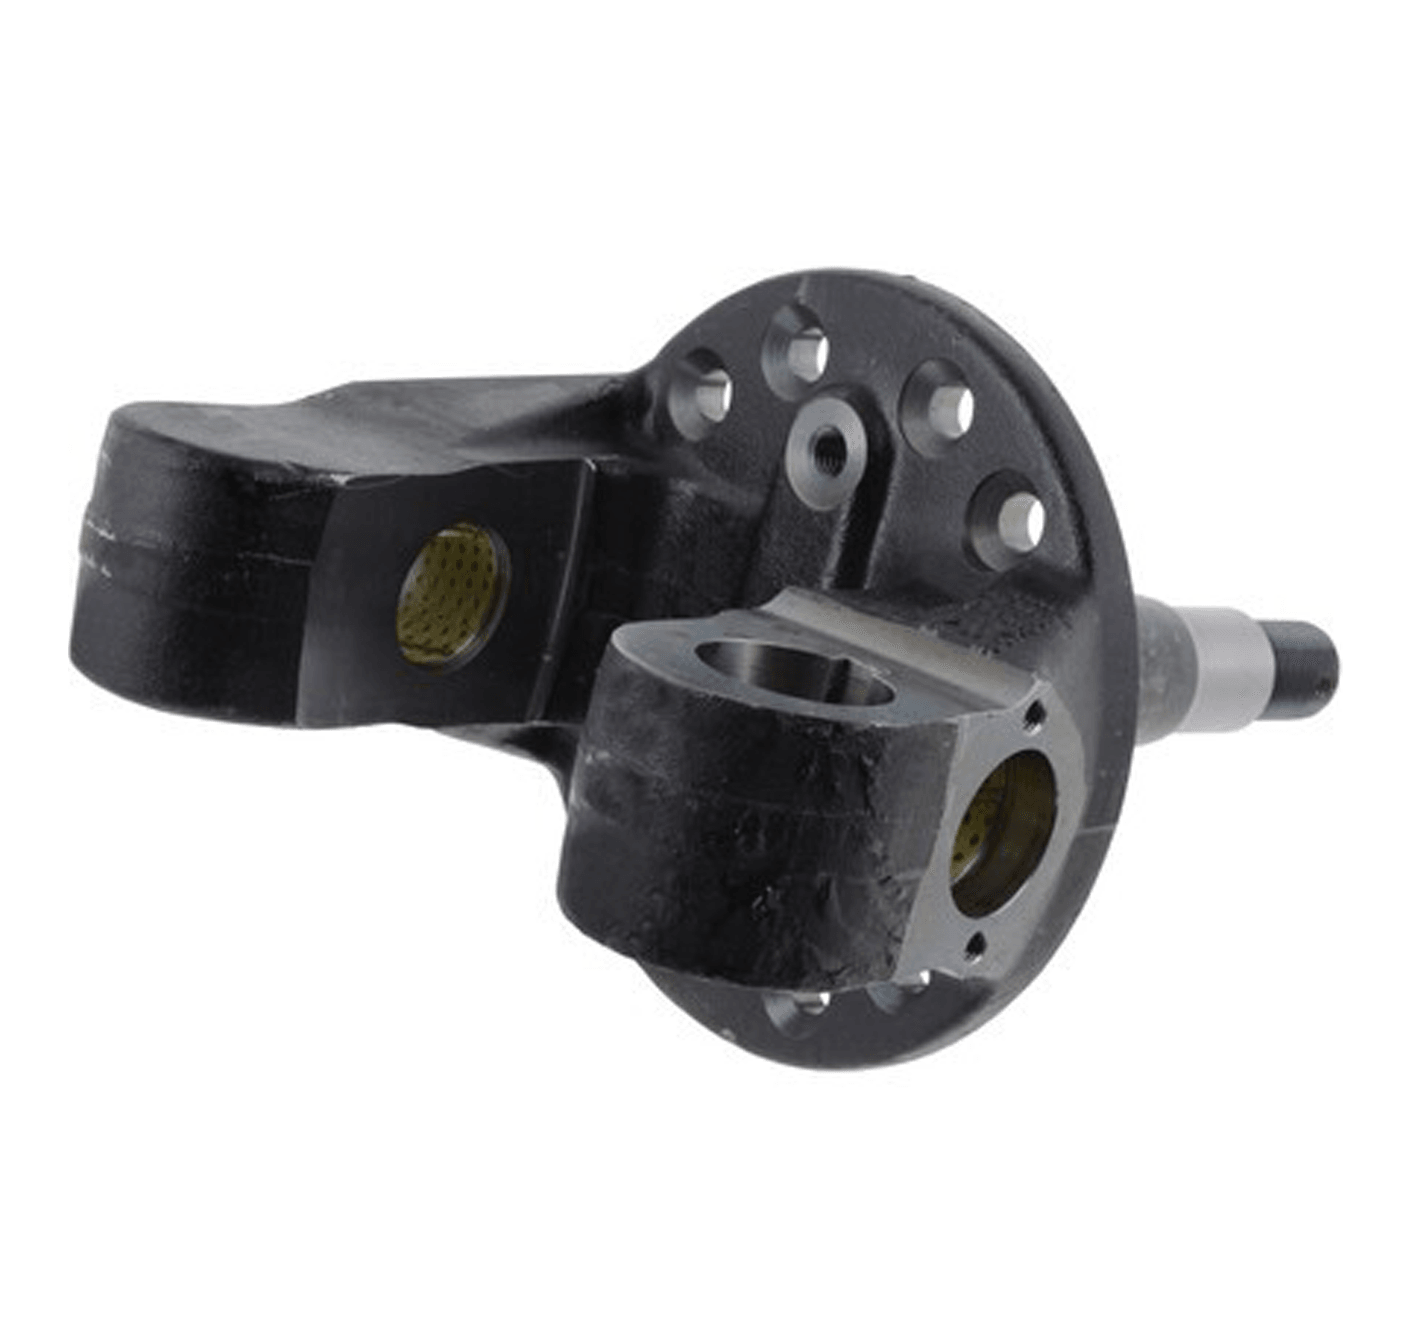 081Sk143 Genuine Dana Holding Corporation® Right Knuckle D850F - ADVANCED TRUCK PARTS